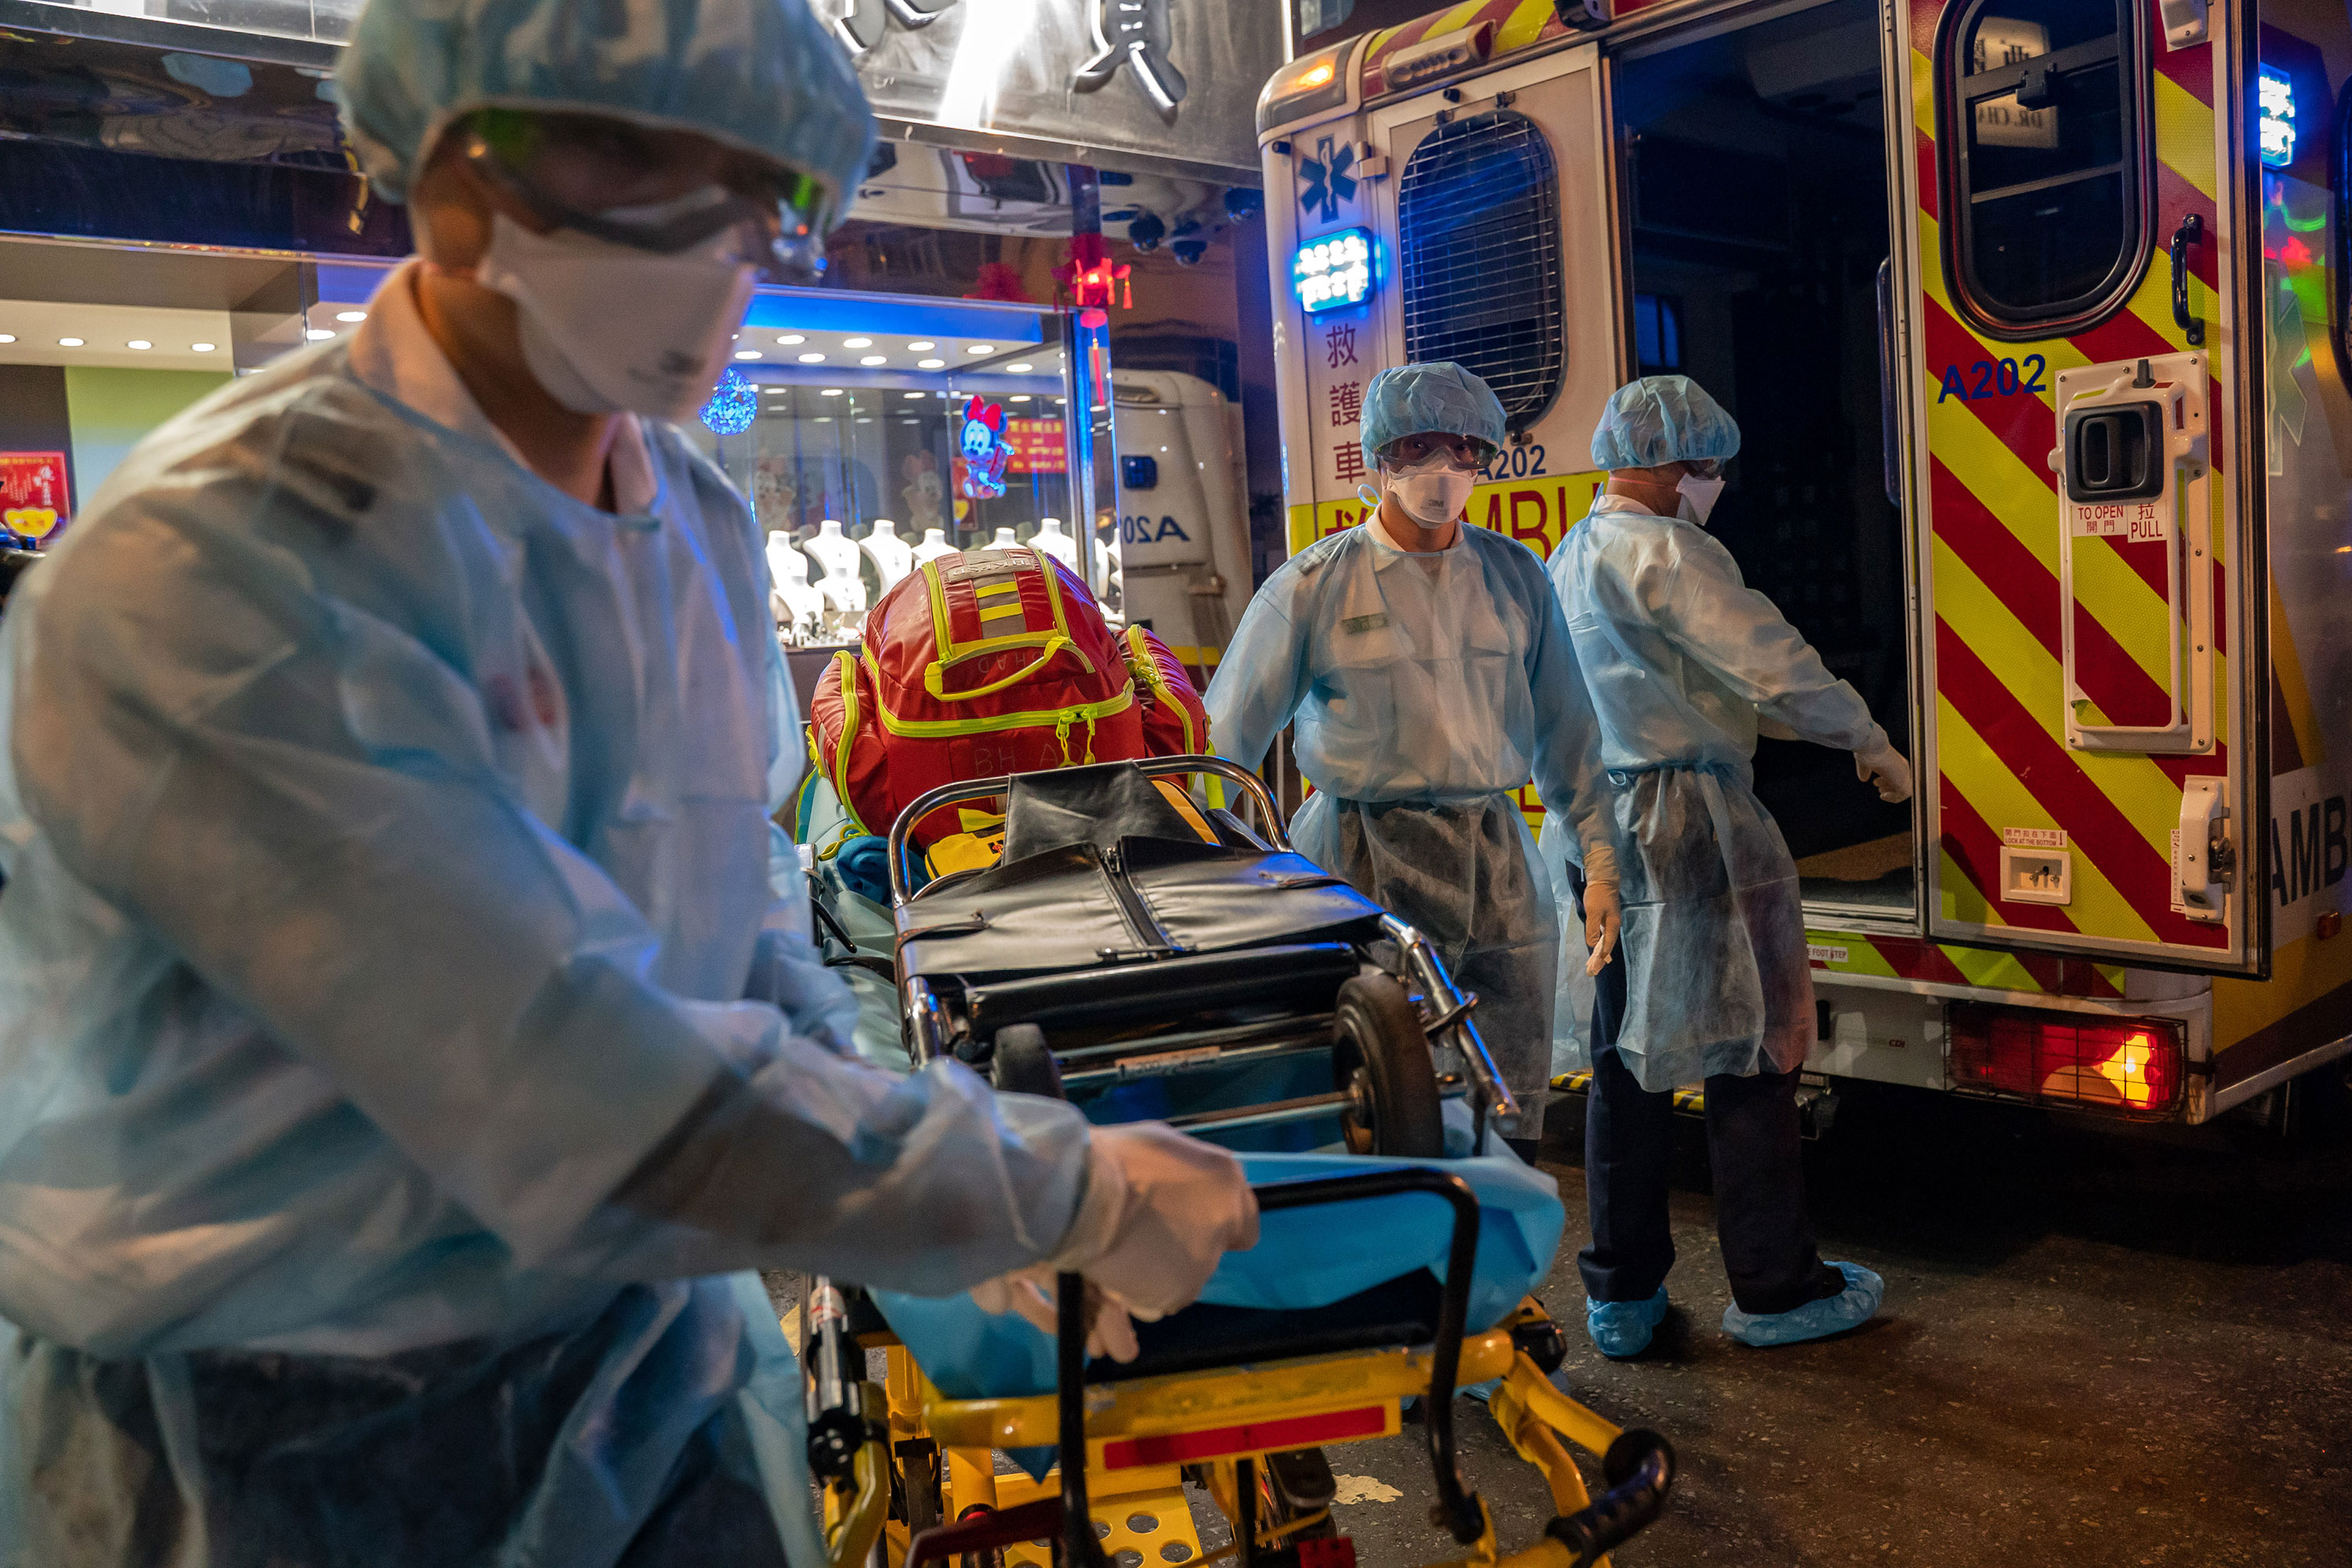 Paramedics carry a stretcher off an ambulance in Hong Kong on February 23.